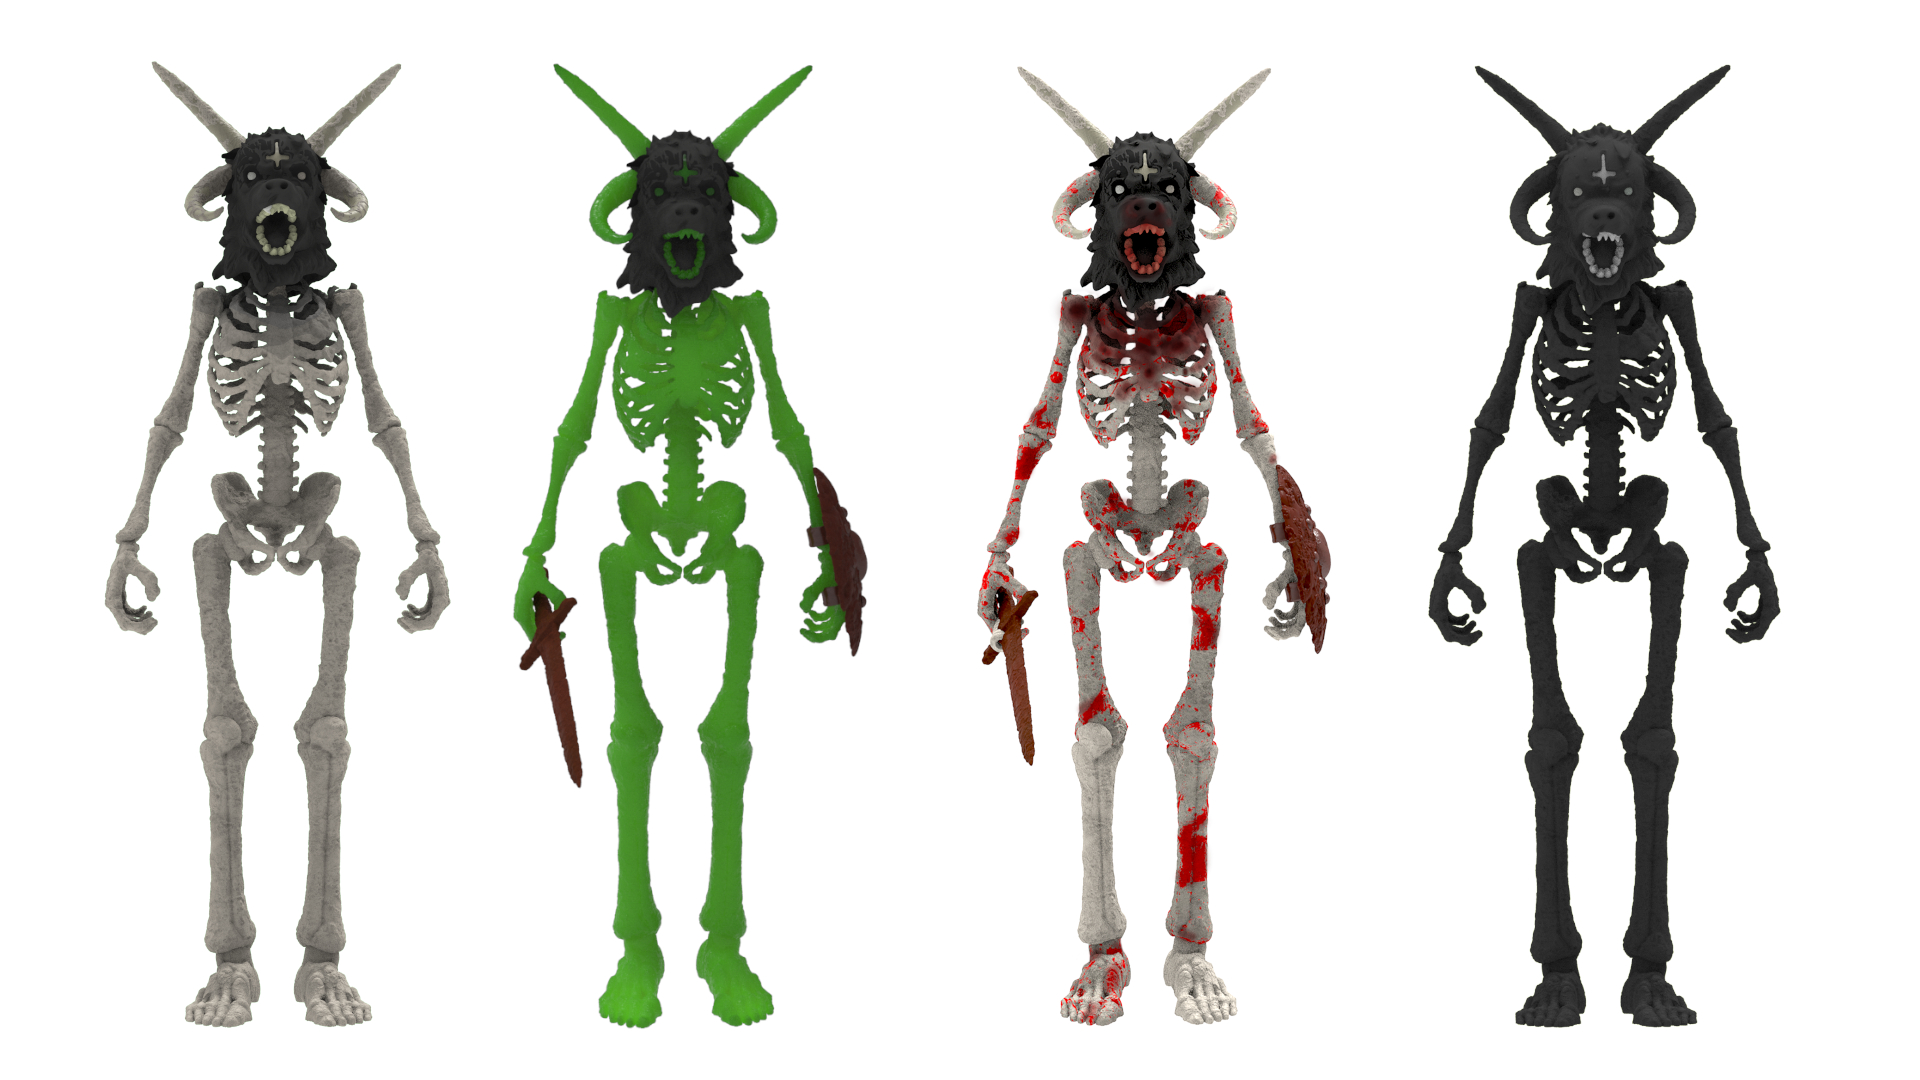 A line up of Dread Risen Mork Borg action figures